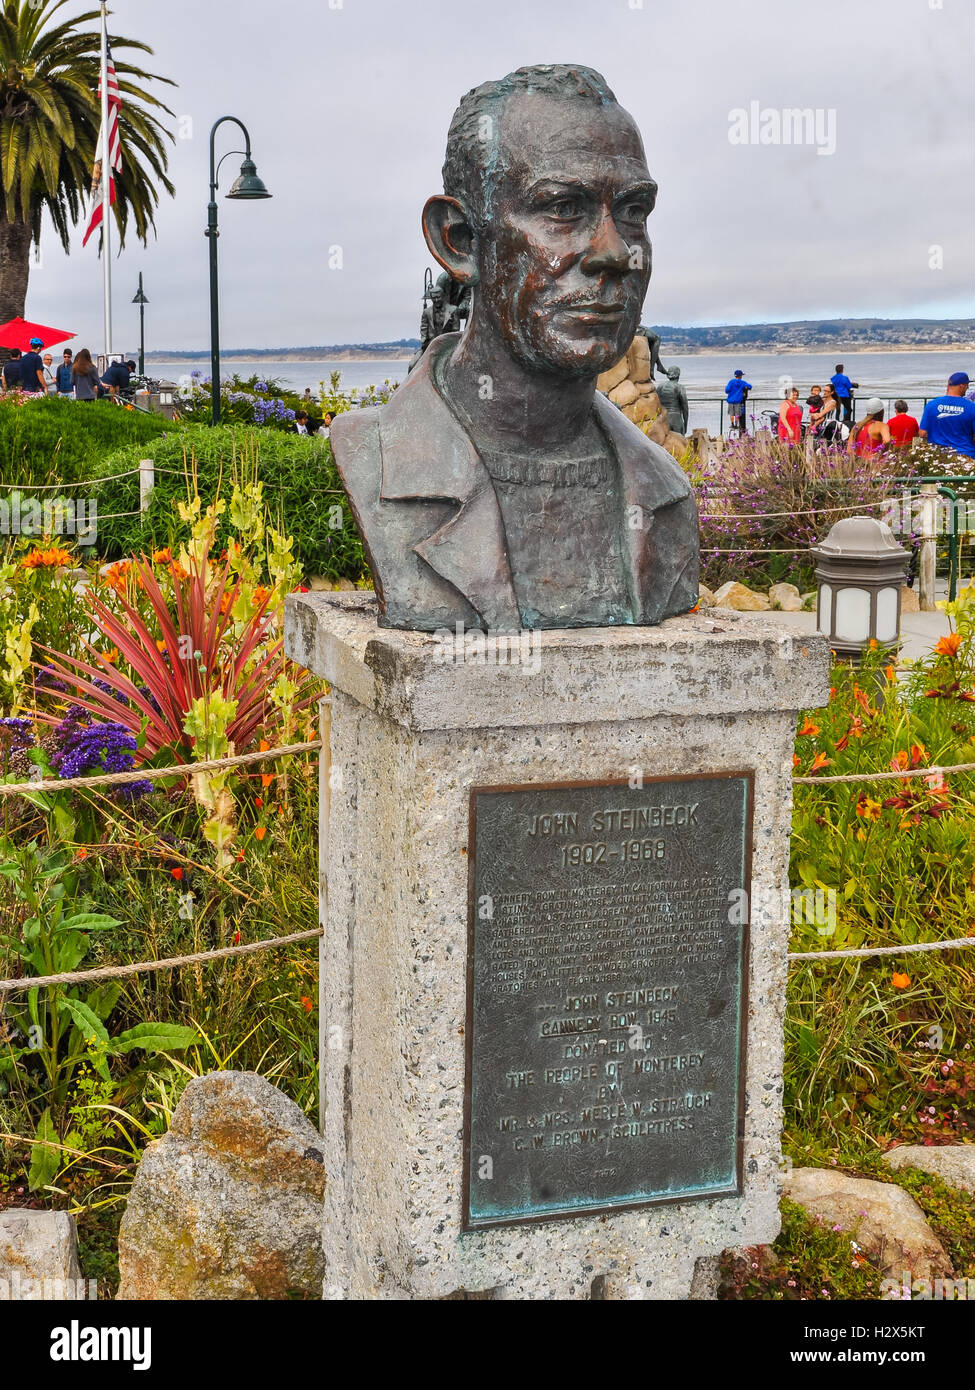 Monterey, CA, USA - Jul. 9, 2016: Bust of John Steinbeck. He won the 1940 Pulitzer Prize and the 1962 Nobel Prize in Literature. Stock Photo